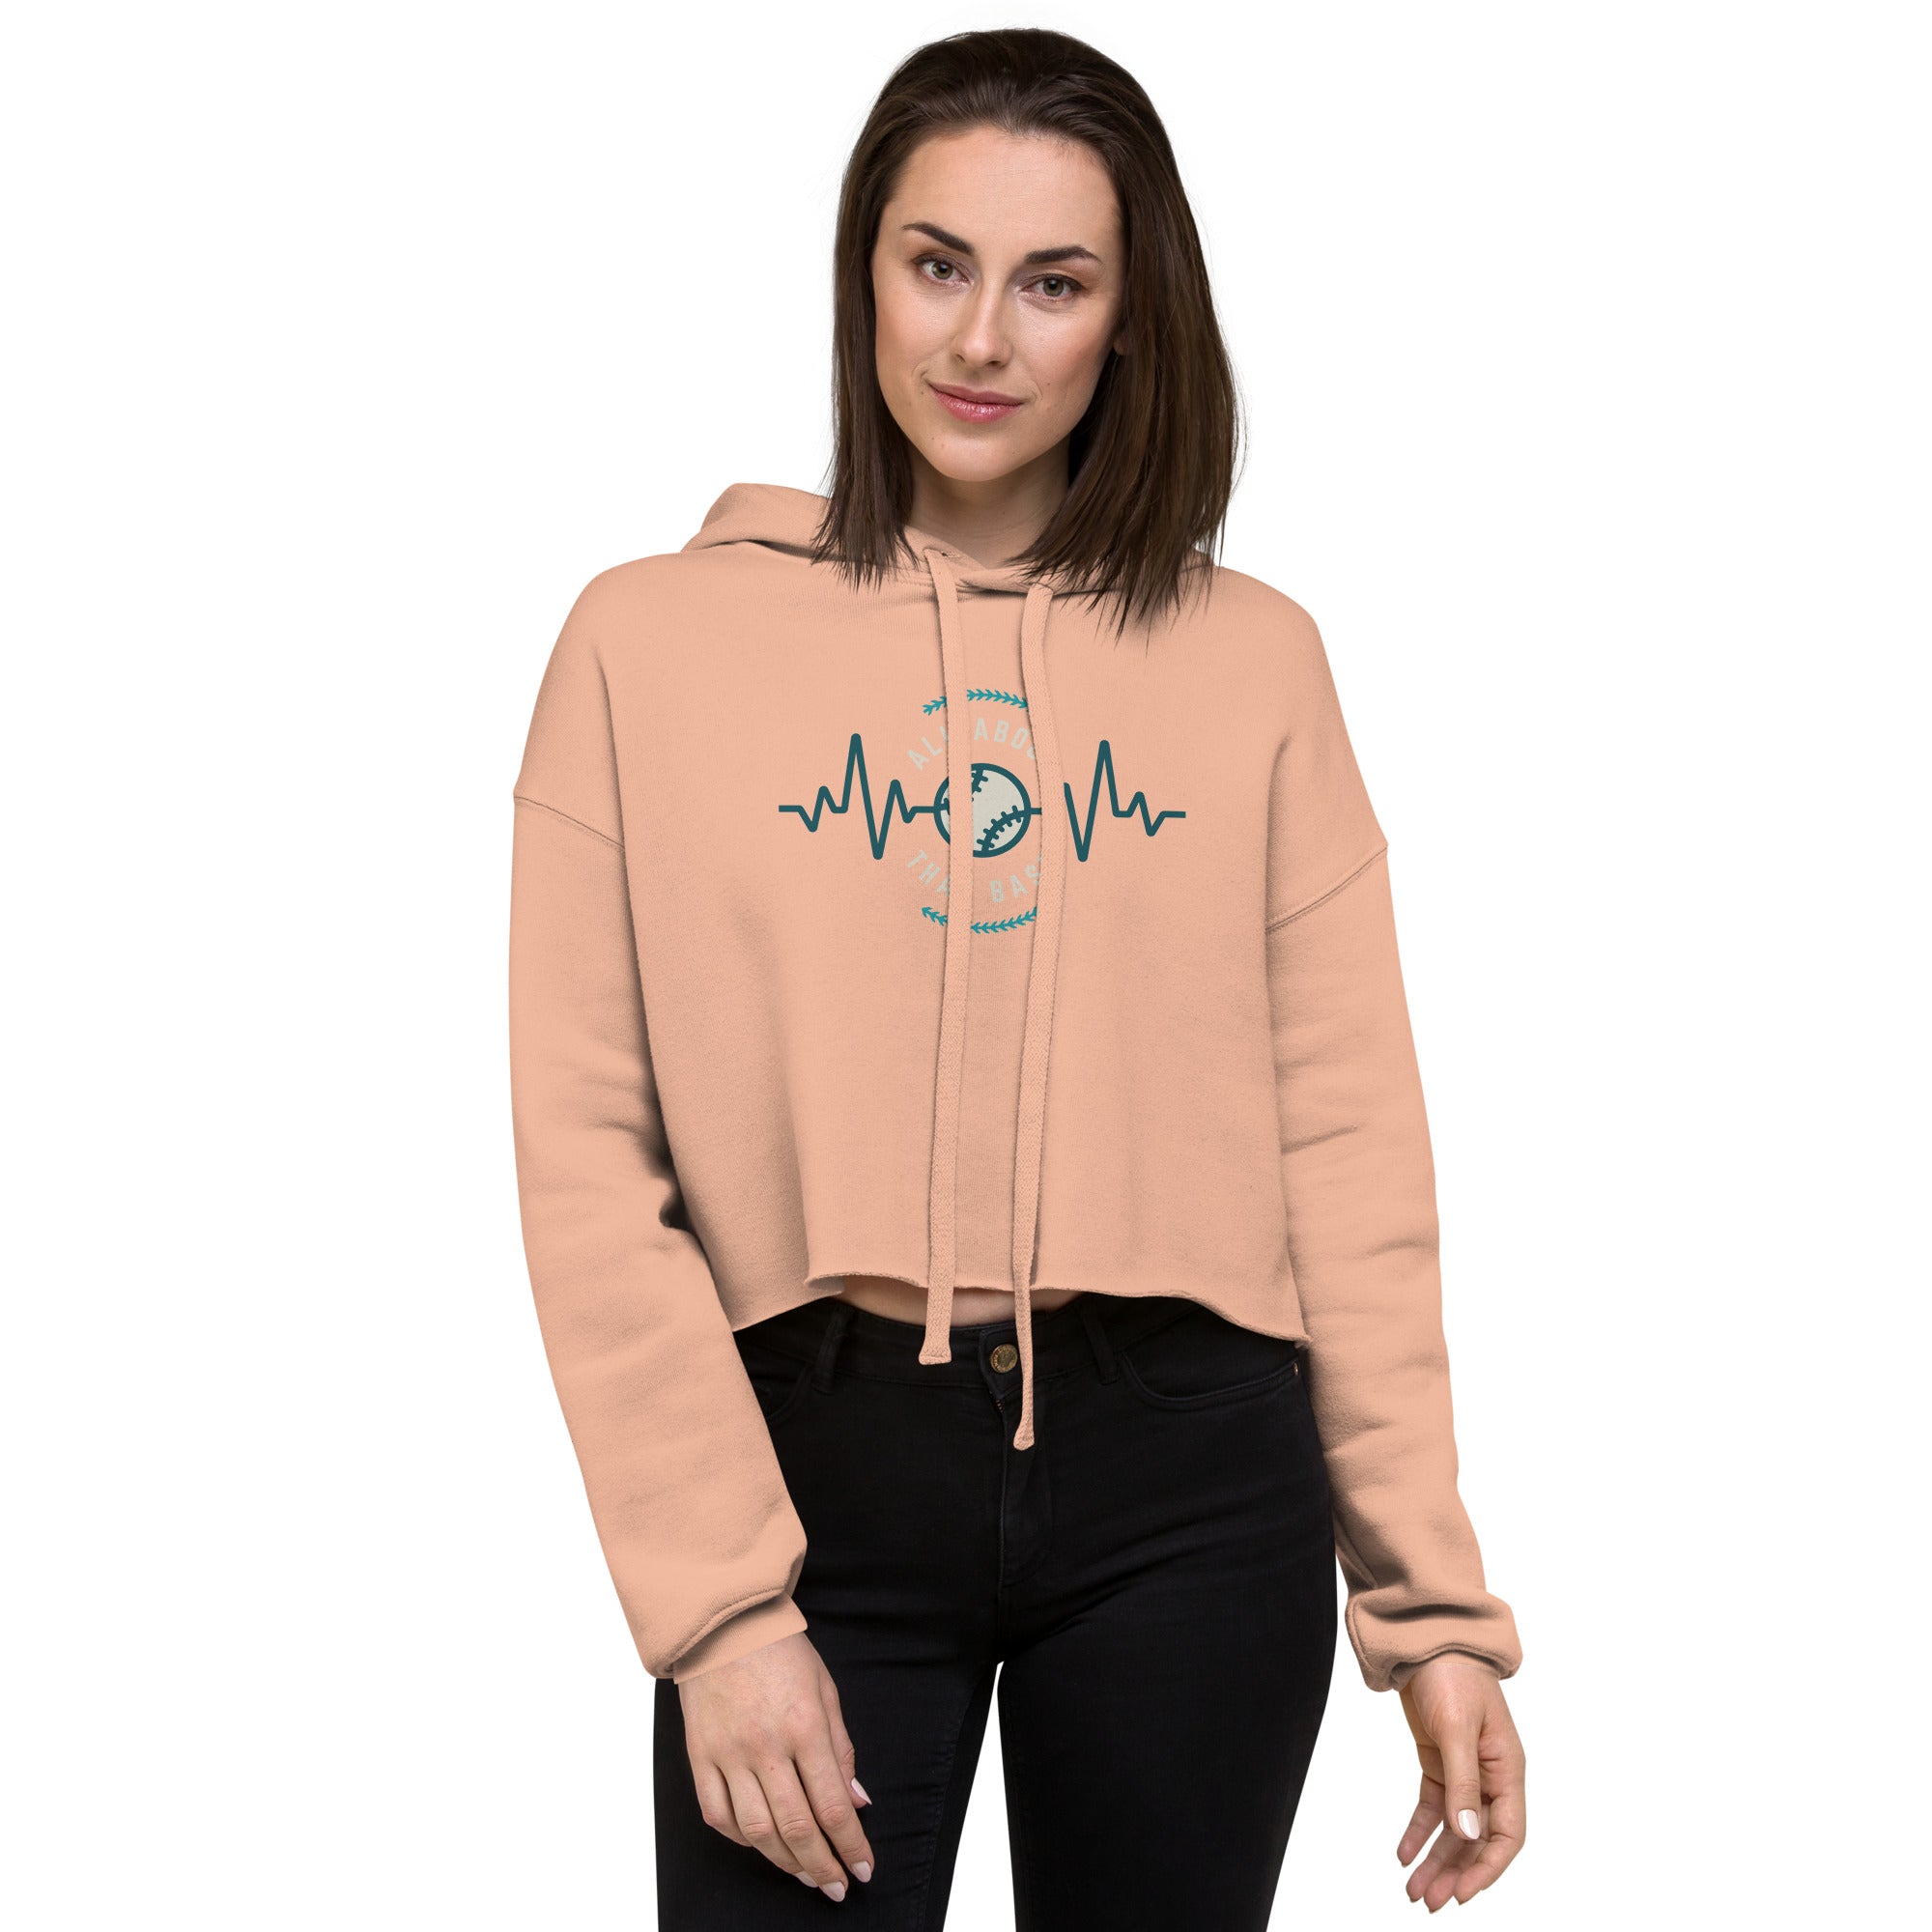 All About That Base Women's Crop Hoodie